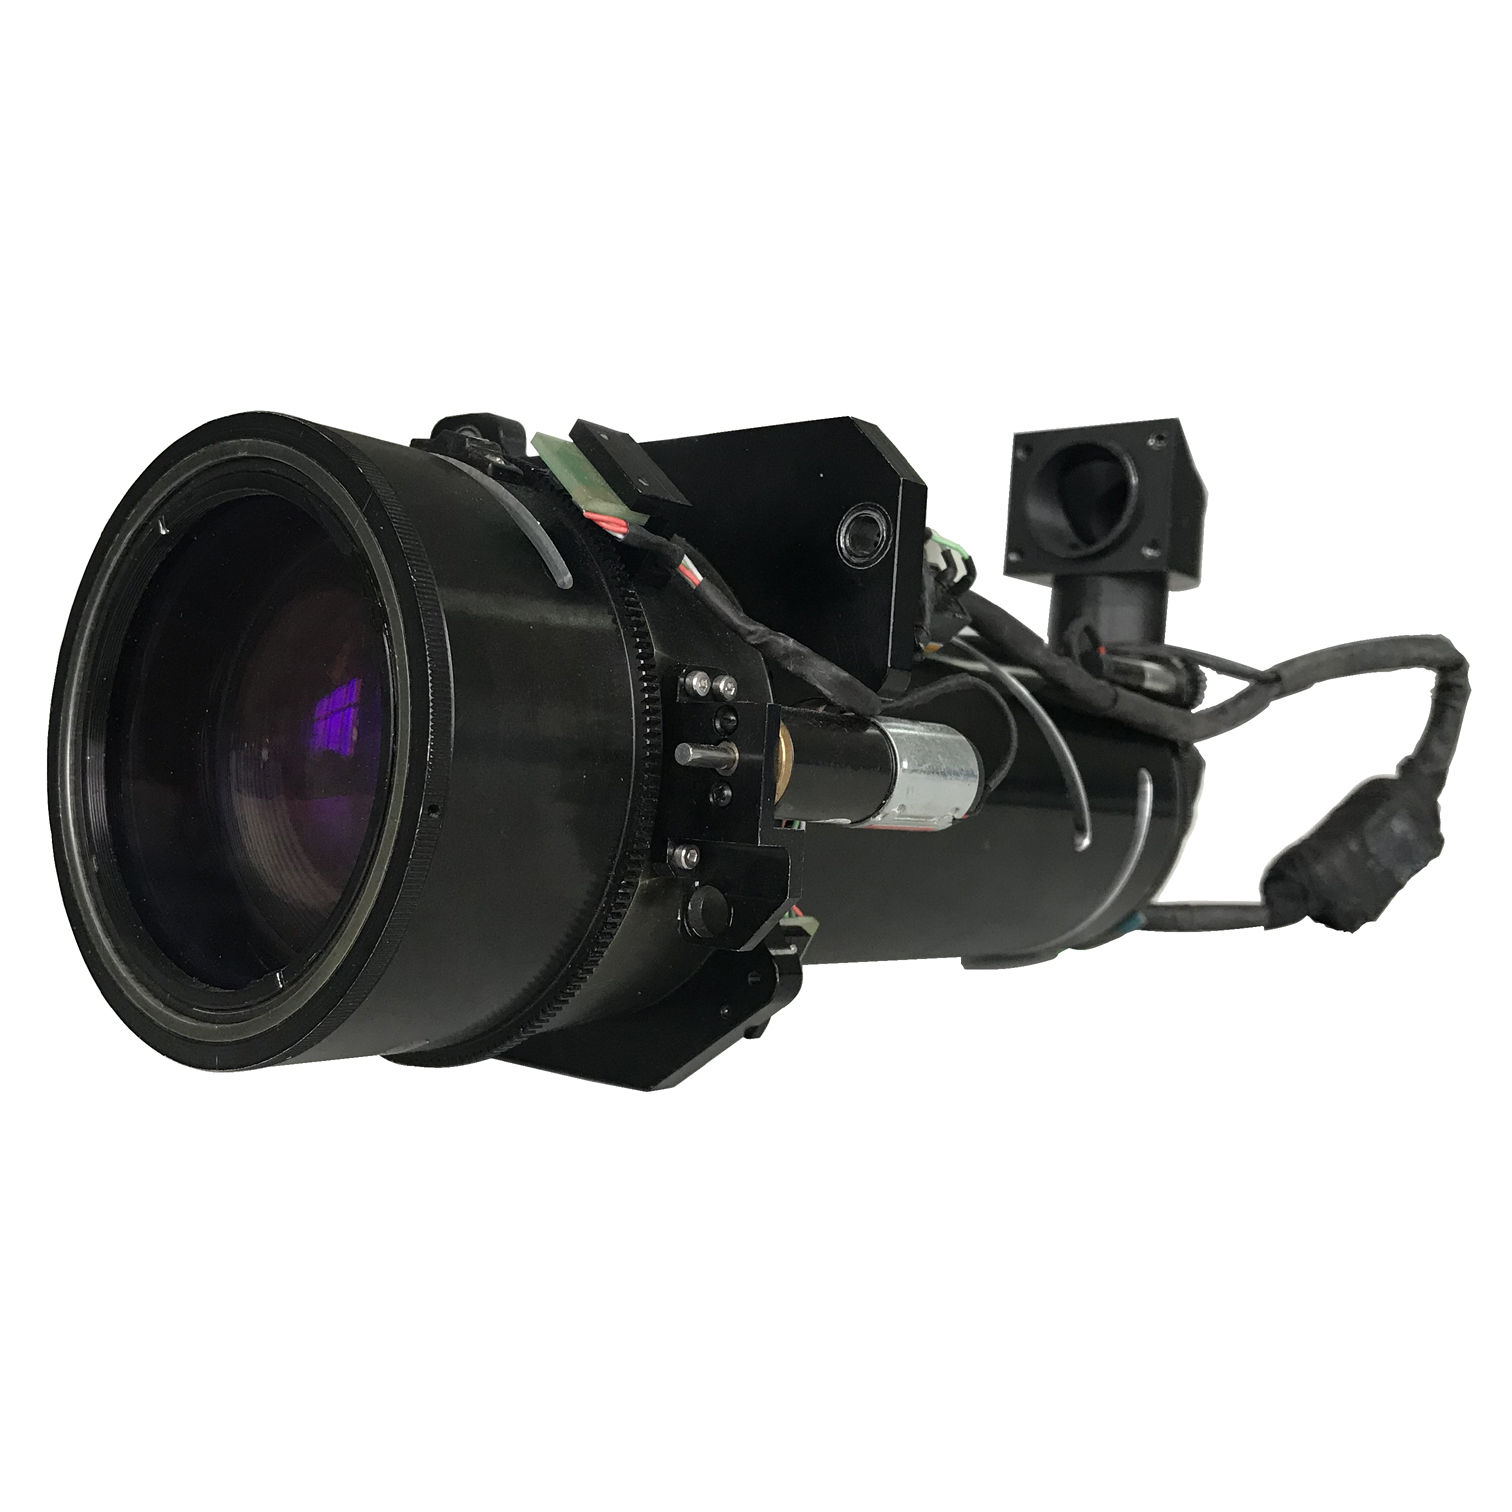 F25-500mm Zoom Lens for Visible